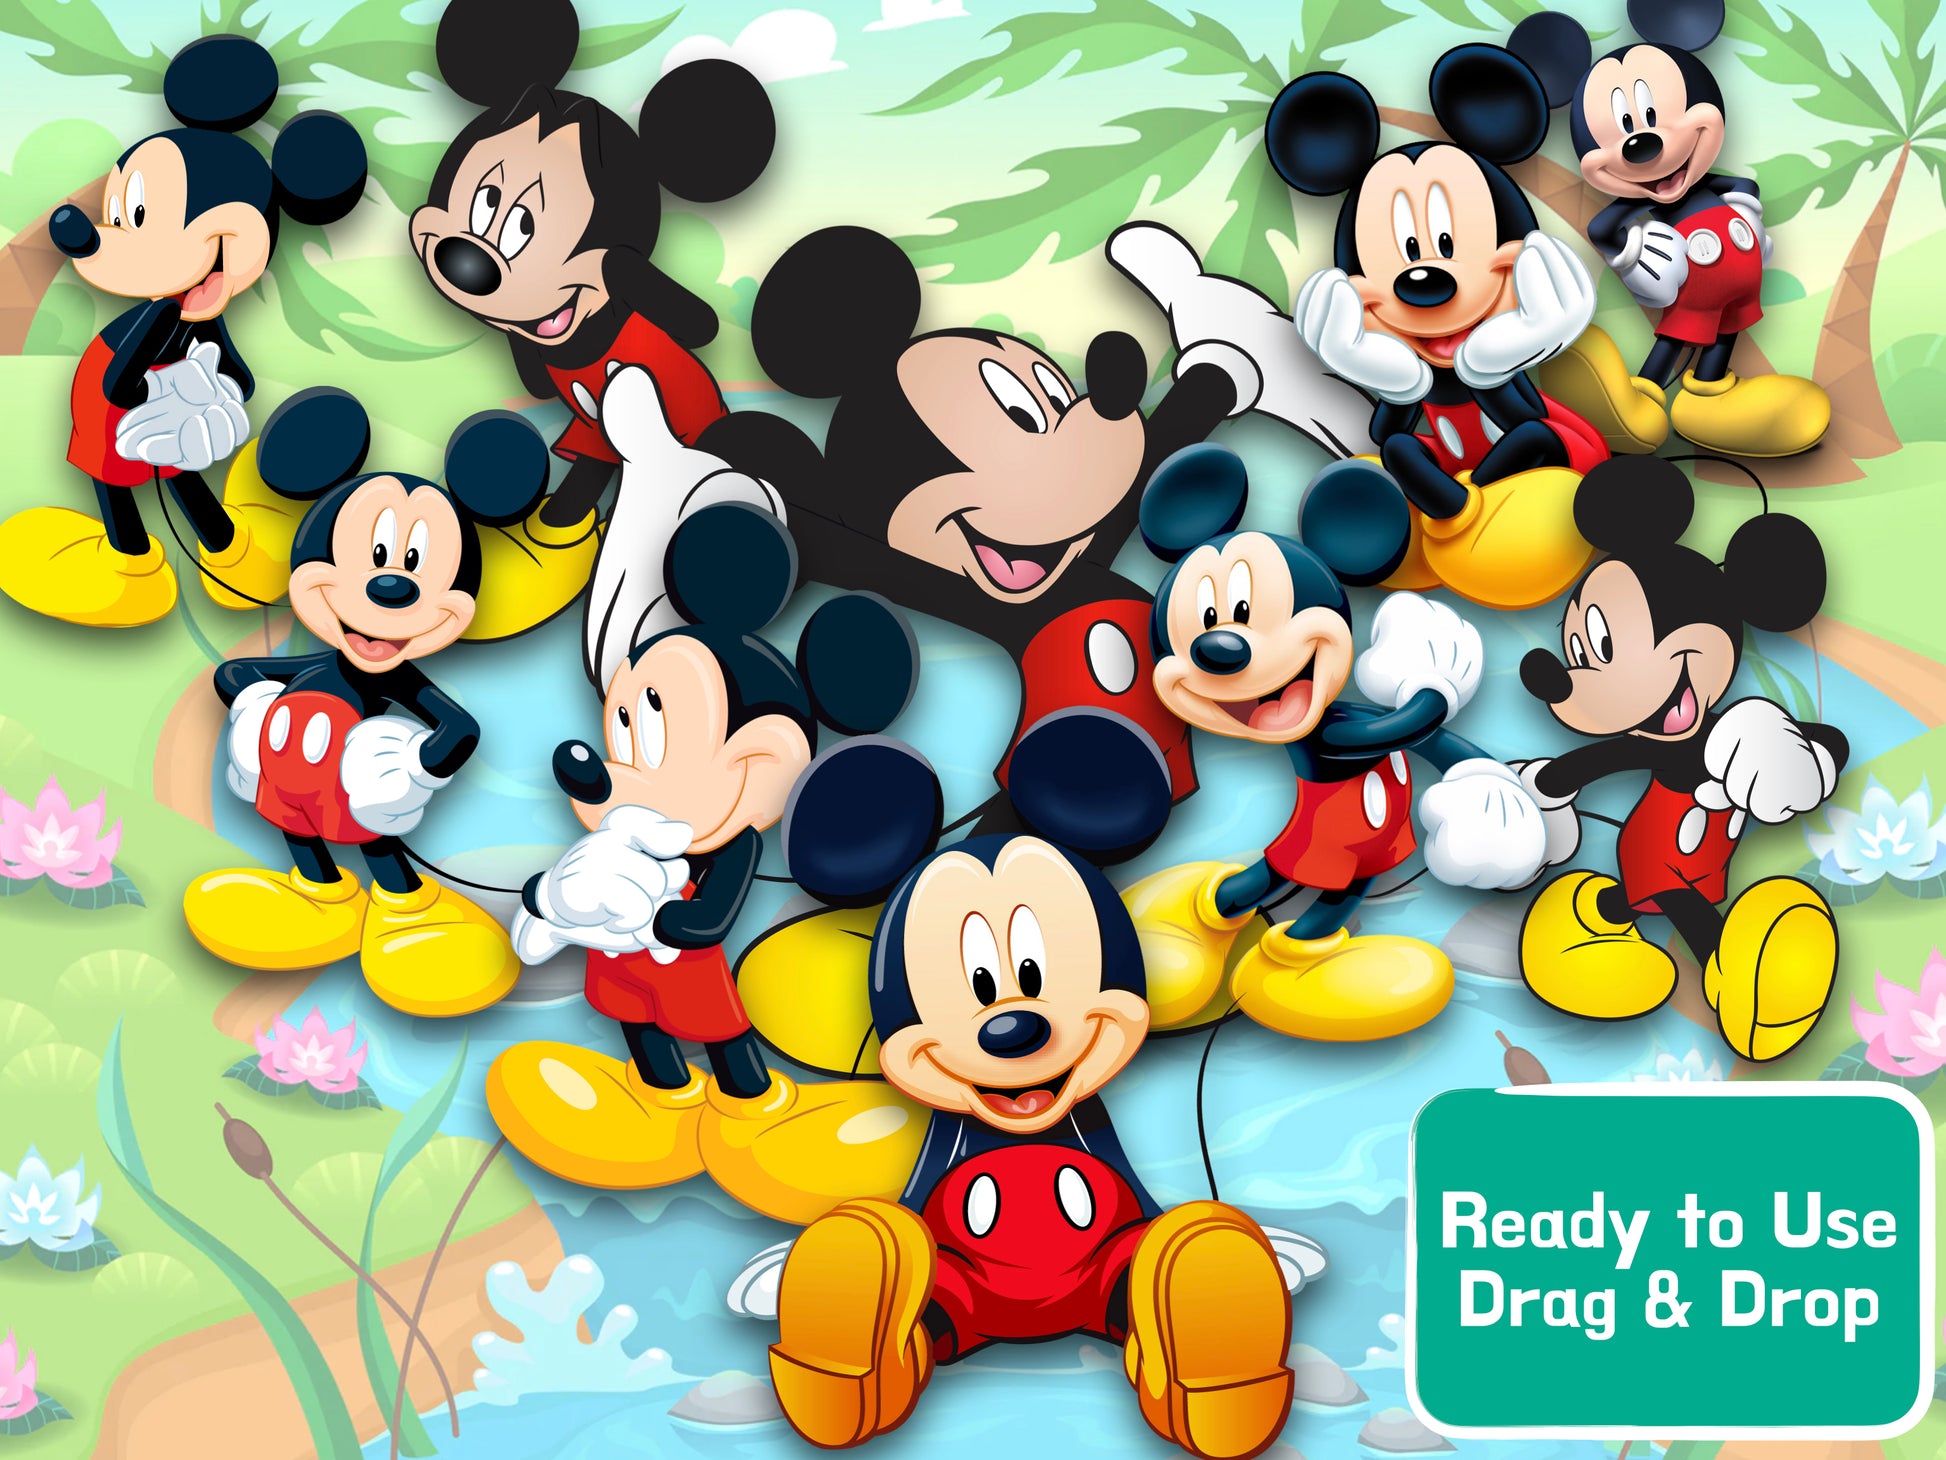 Mickey Mouse Clubhouse PNG File - PNG All